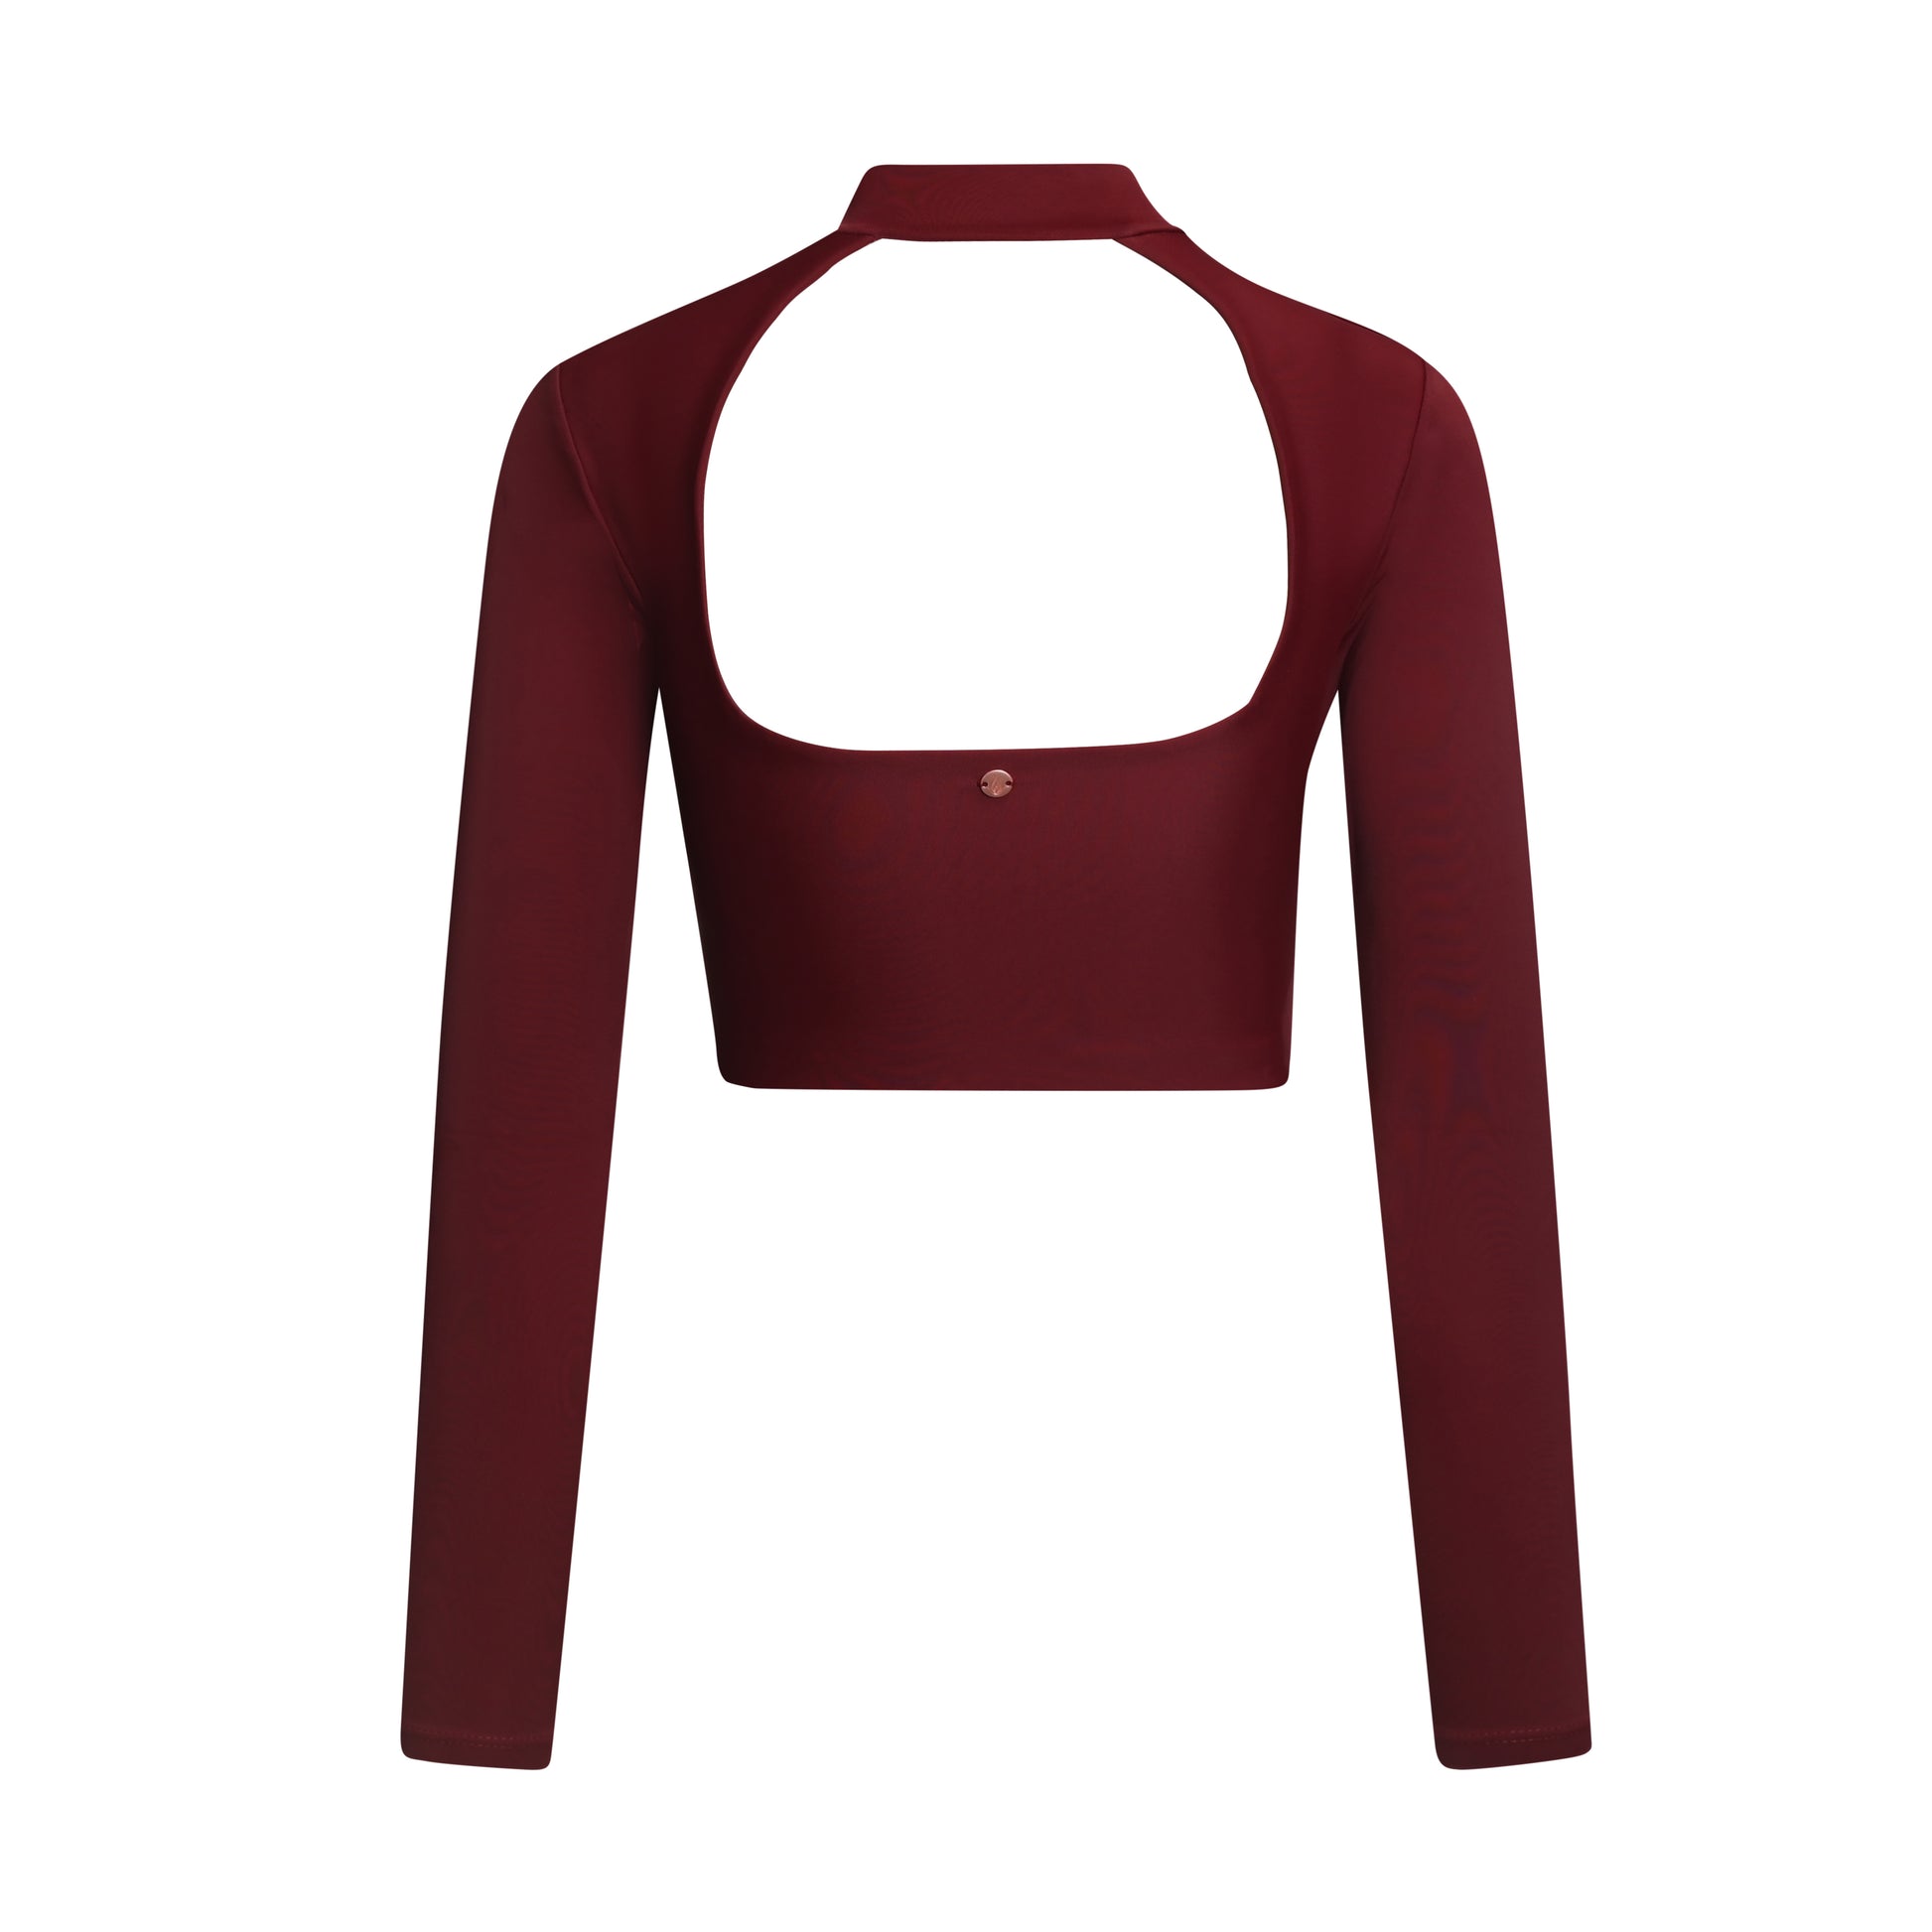 surf cropped top rashguard long sleeves swimsuit burgundy red ruby